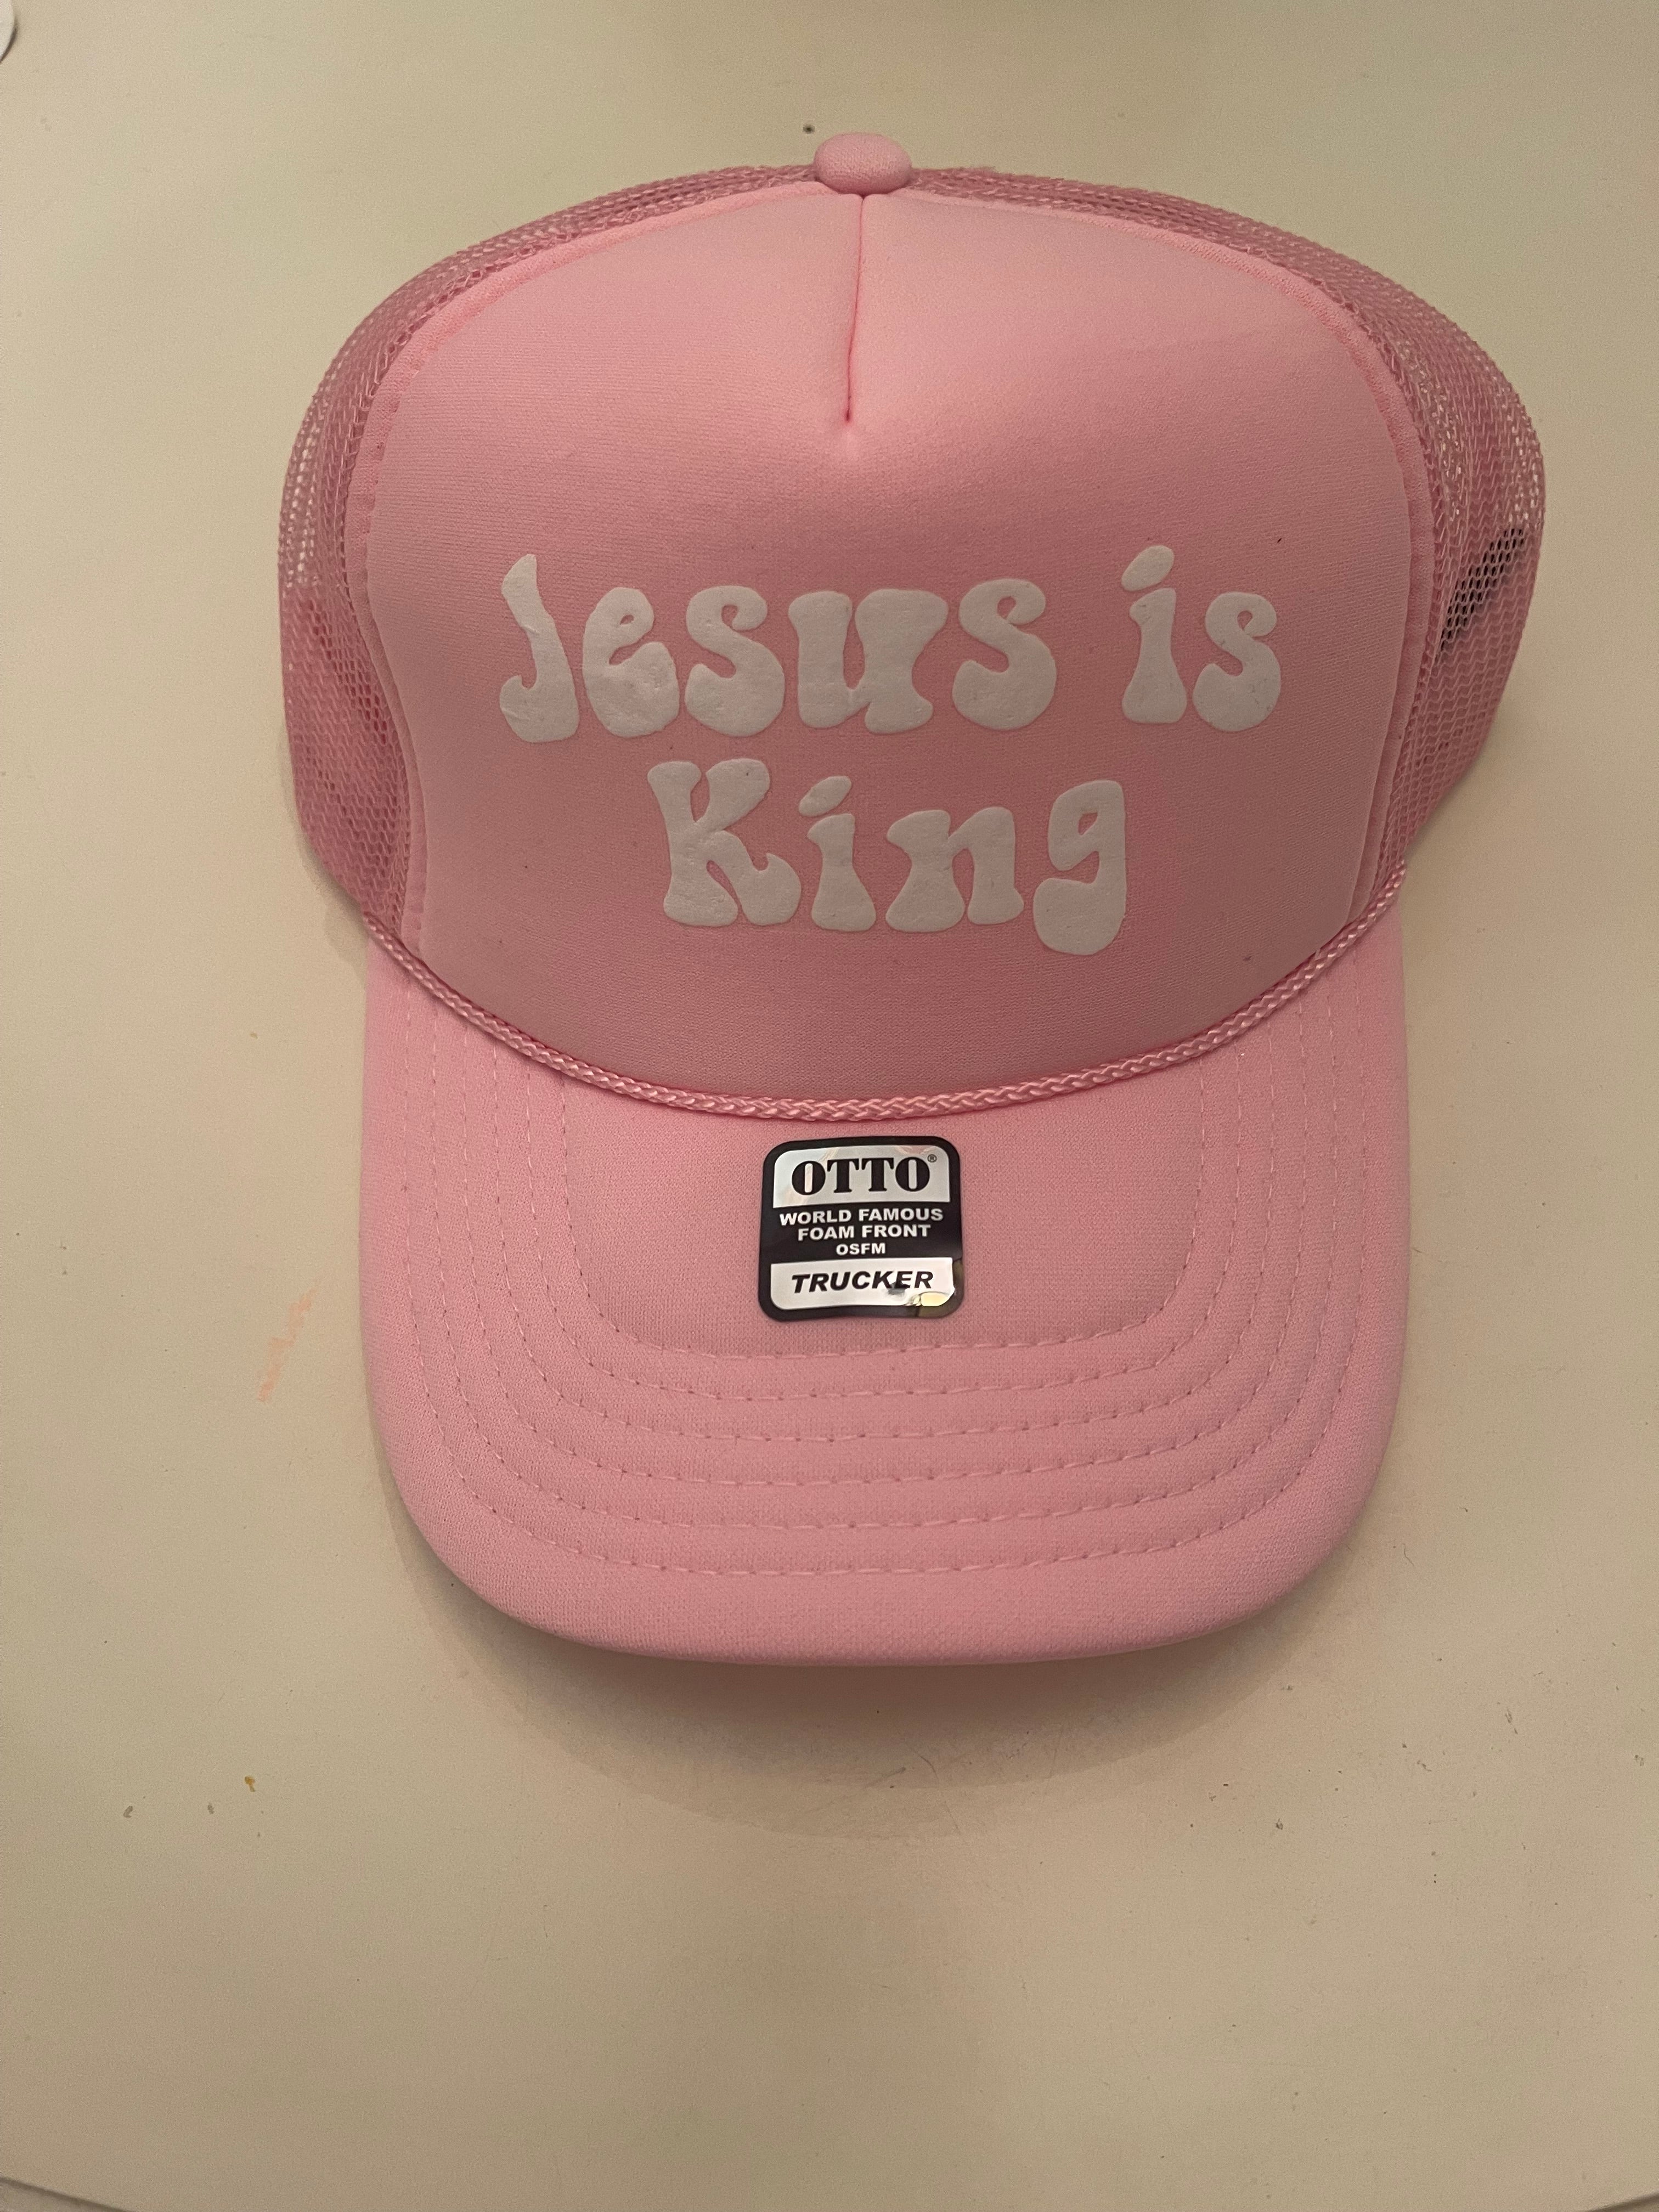 Jesus is King! Trucker Hat Pink and white